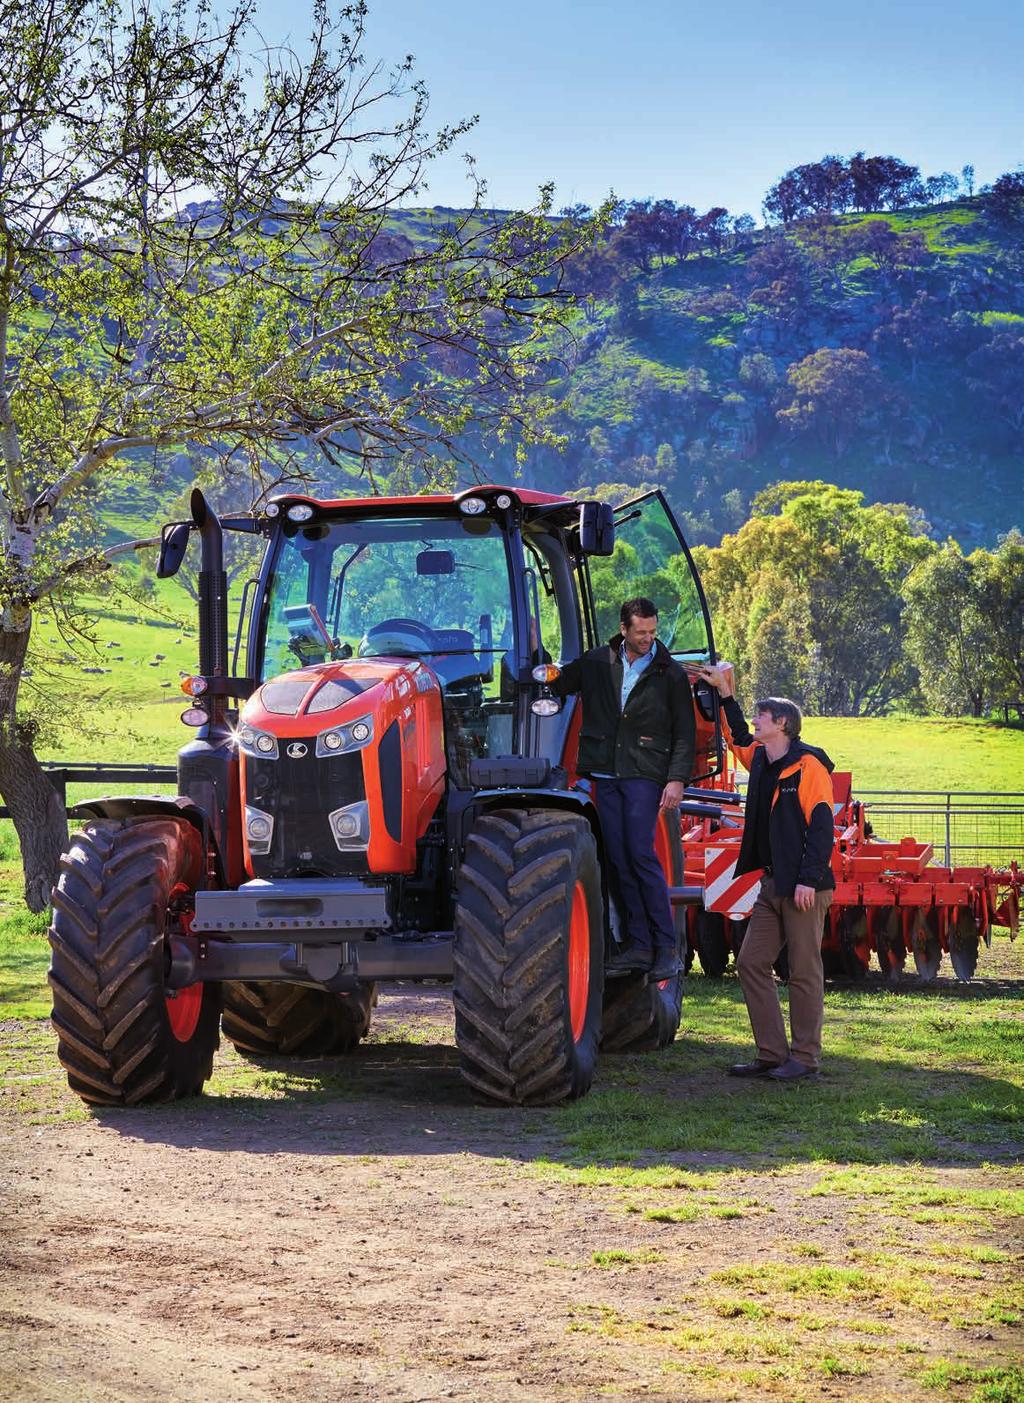 KUBOTA AUTUMN 2017 CATALOGUE THE KUBOTA POWER IN A FIELD OF ITS OWN. UP TO 170HP The Kubota M7-1 Series is our most powerful and versatile tractor ever.